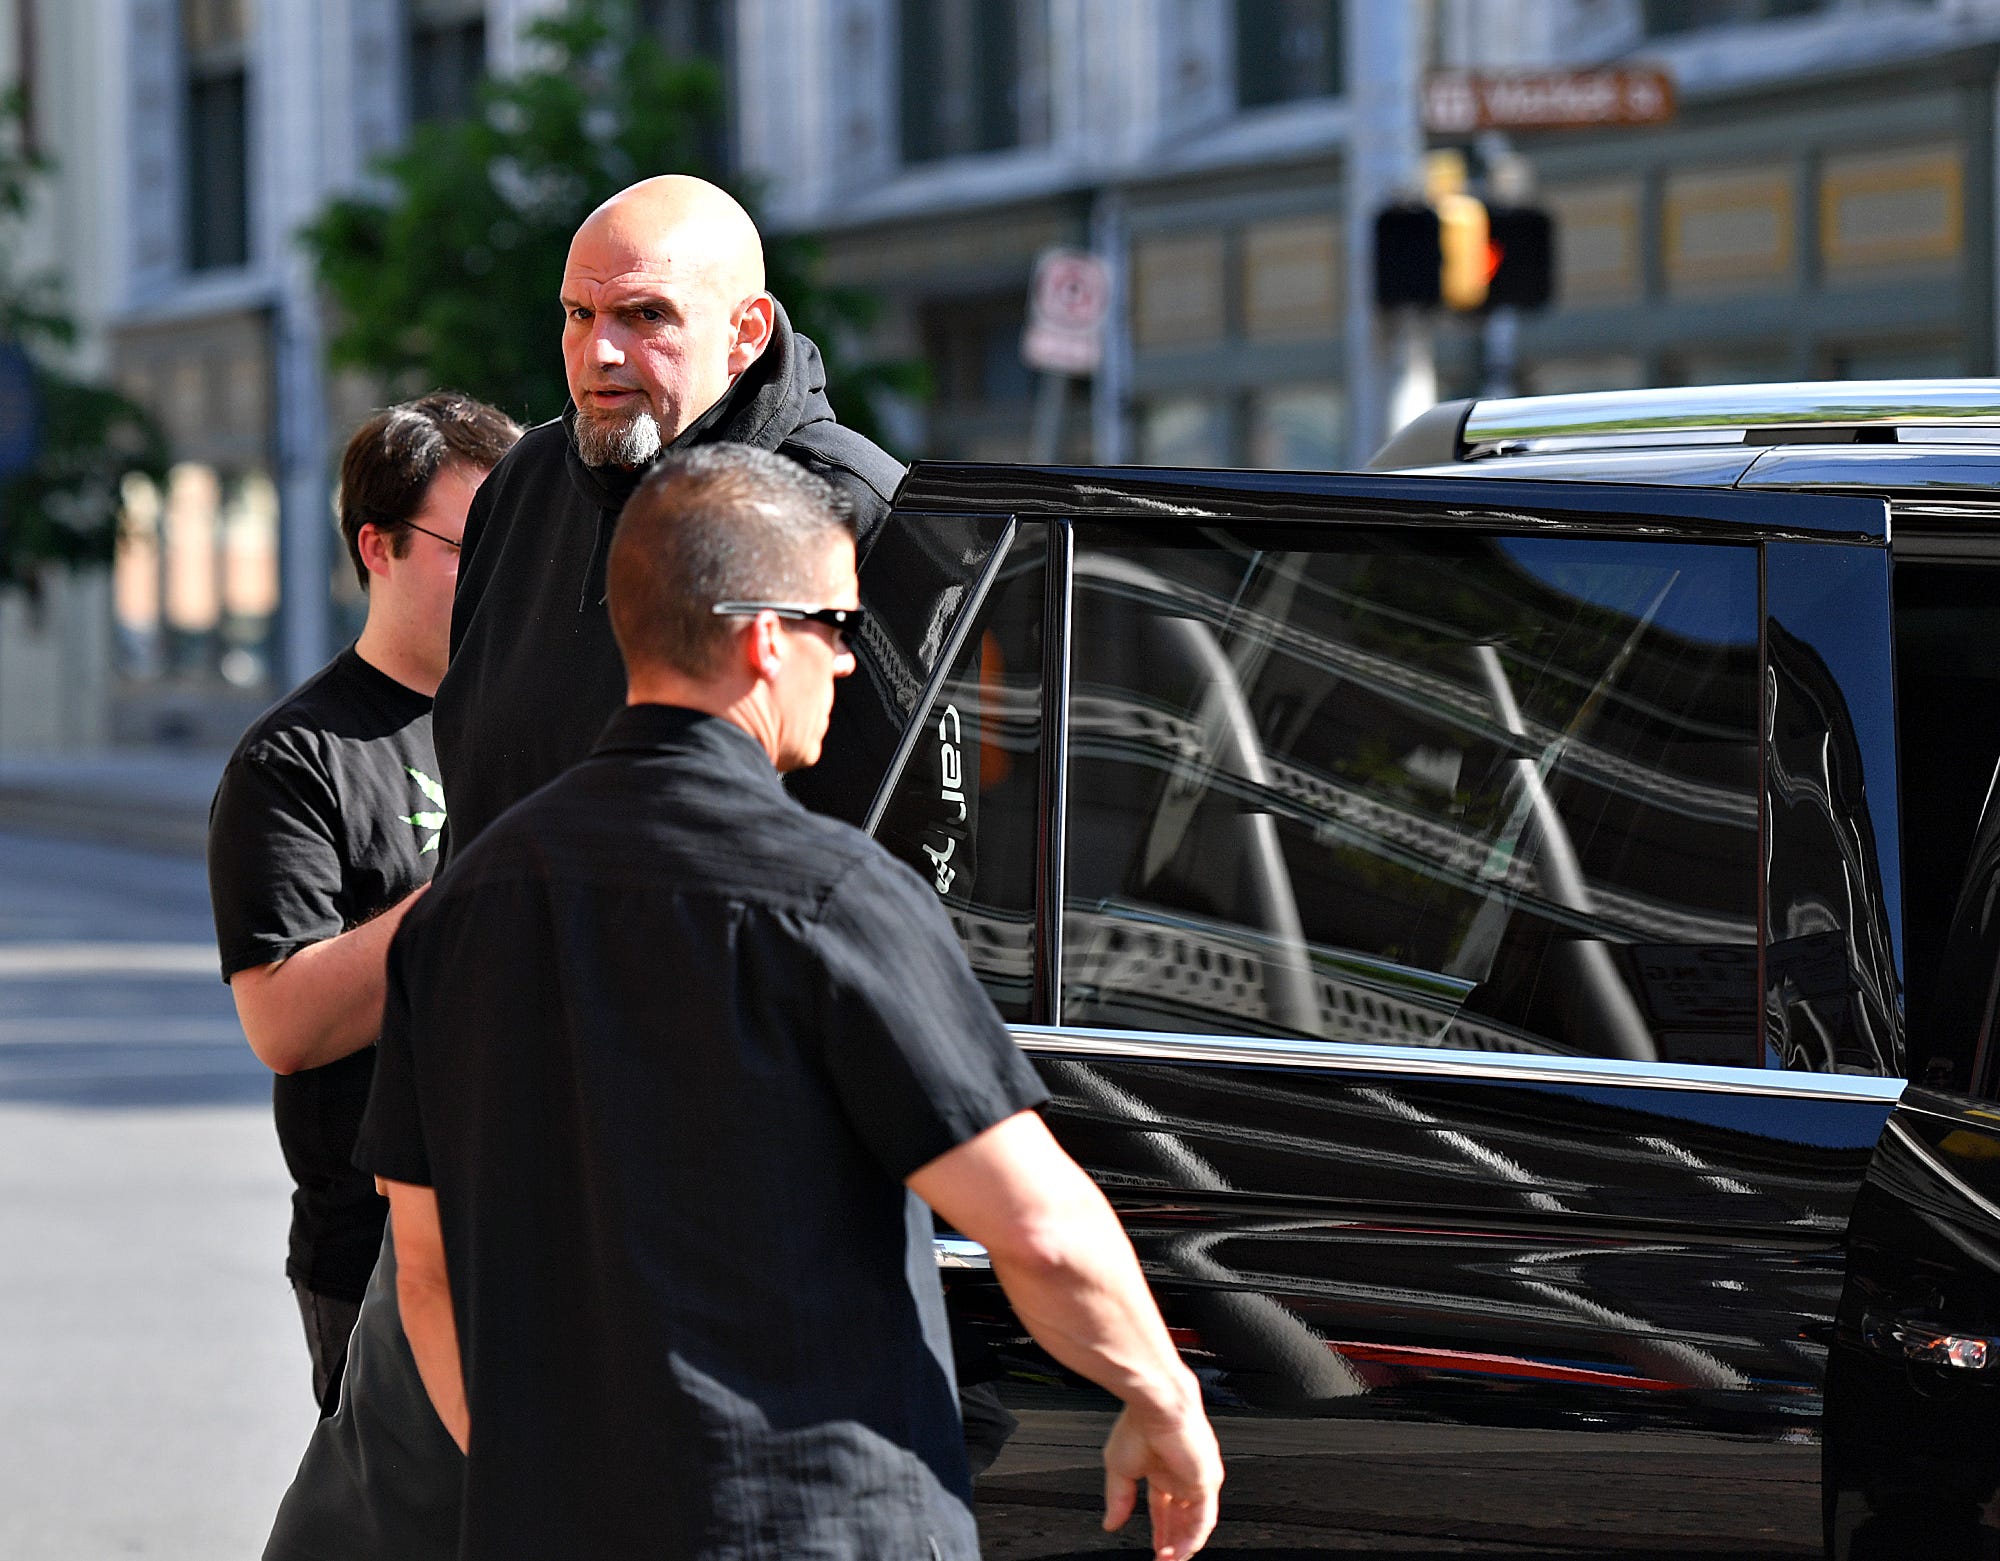 Lt. Gov. John Fetterman arrives during a campaign stop at Holy Hound Taproom in York City, Thursday, May 12, 2022. Fetterman is running for U.S. Senate. Dawn J. Sagert photo